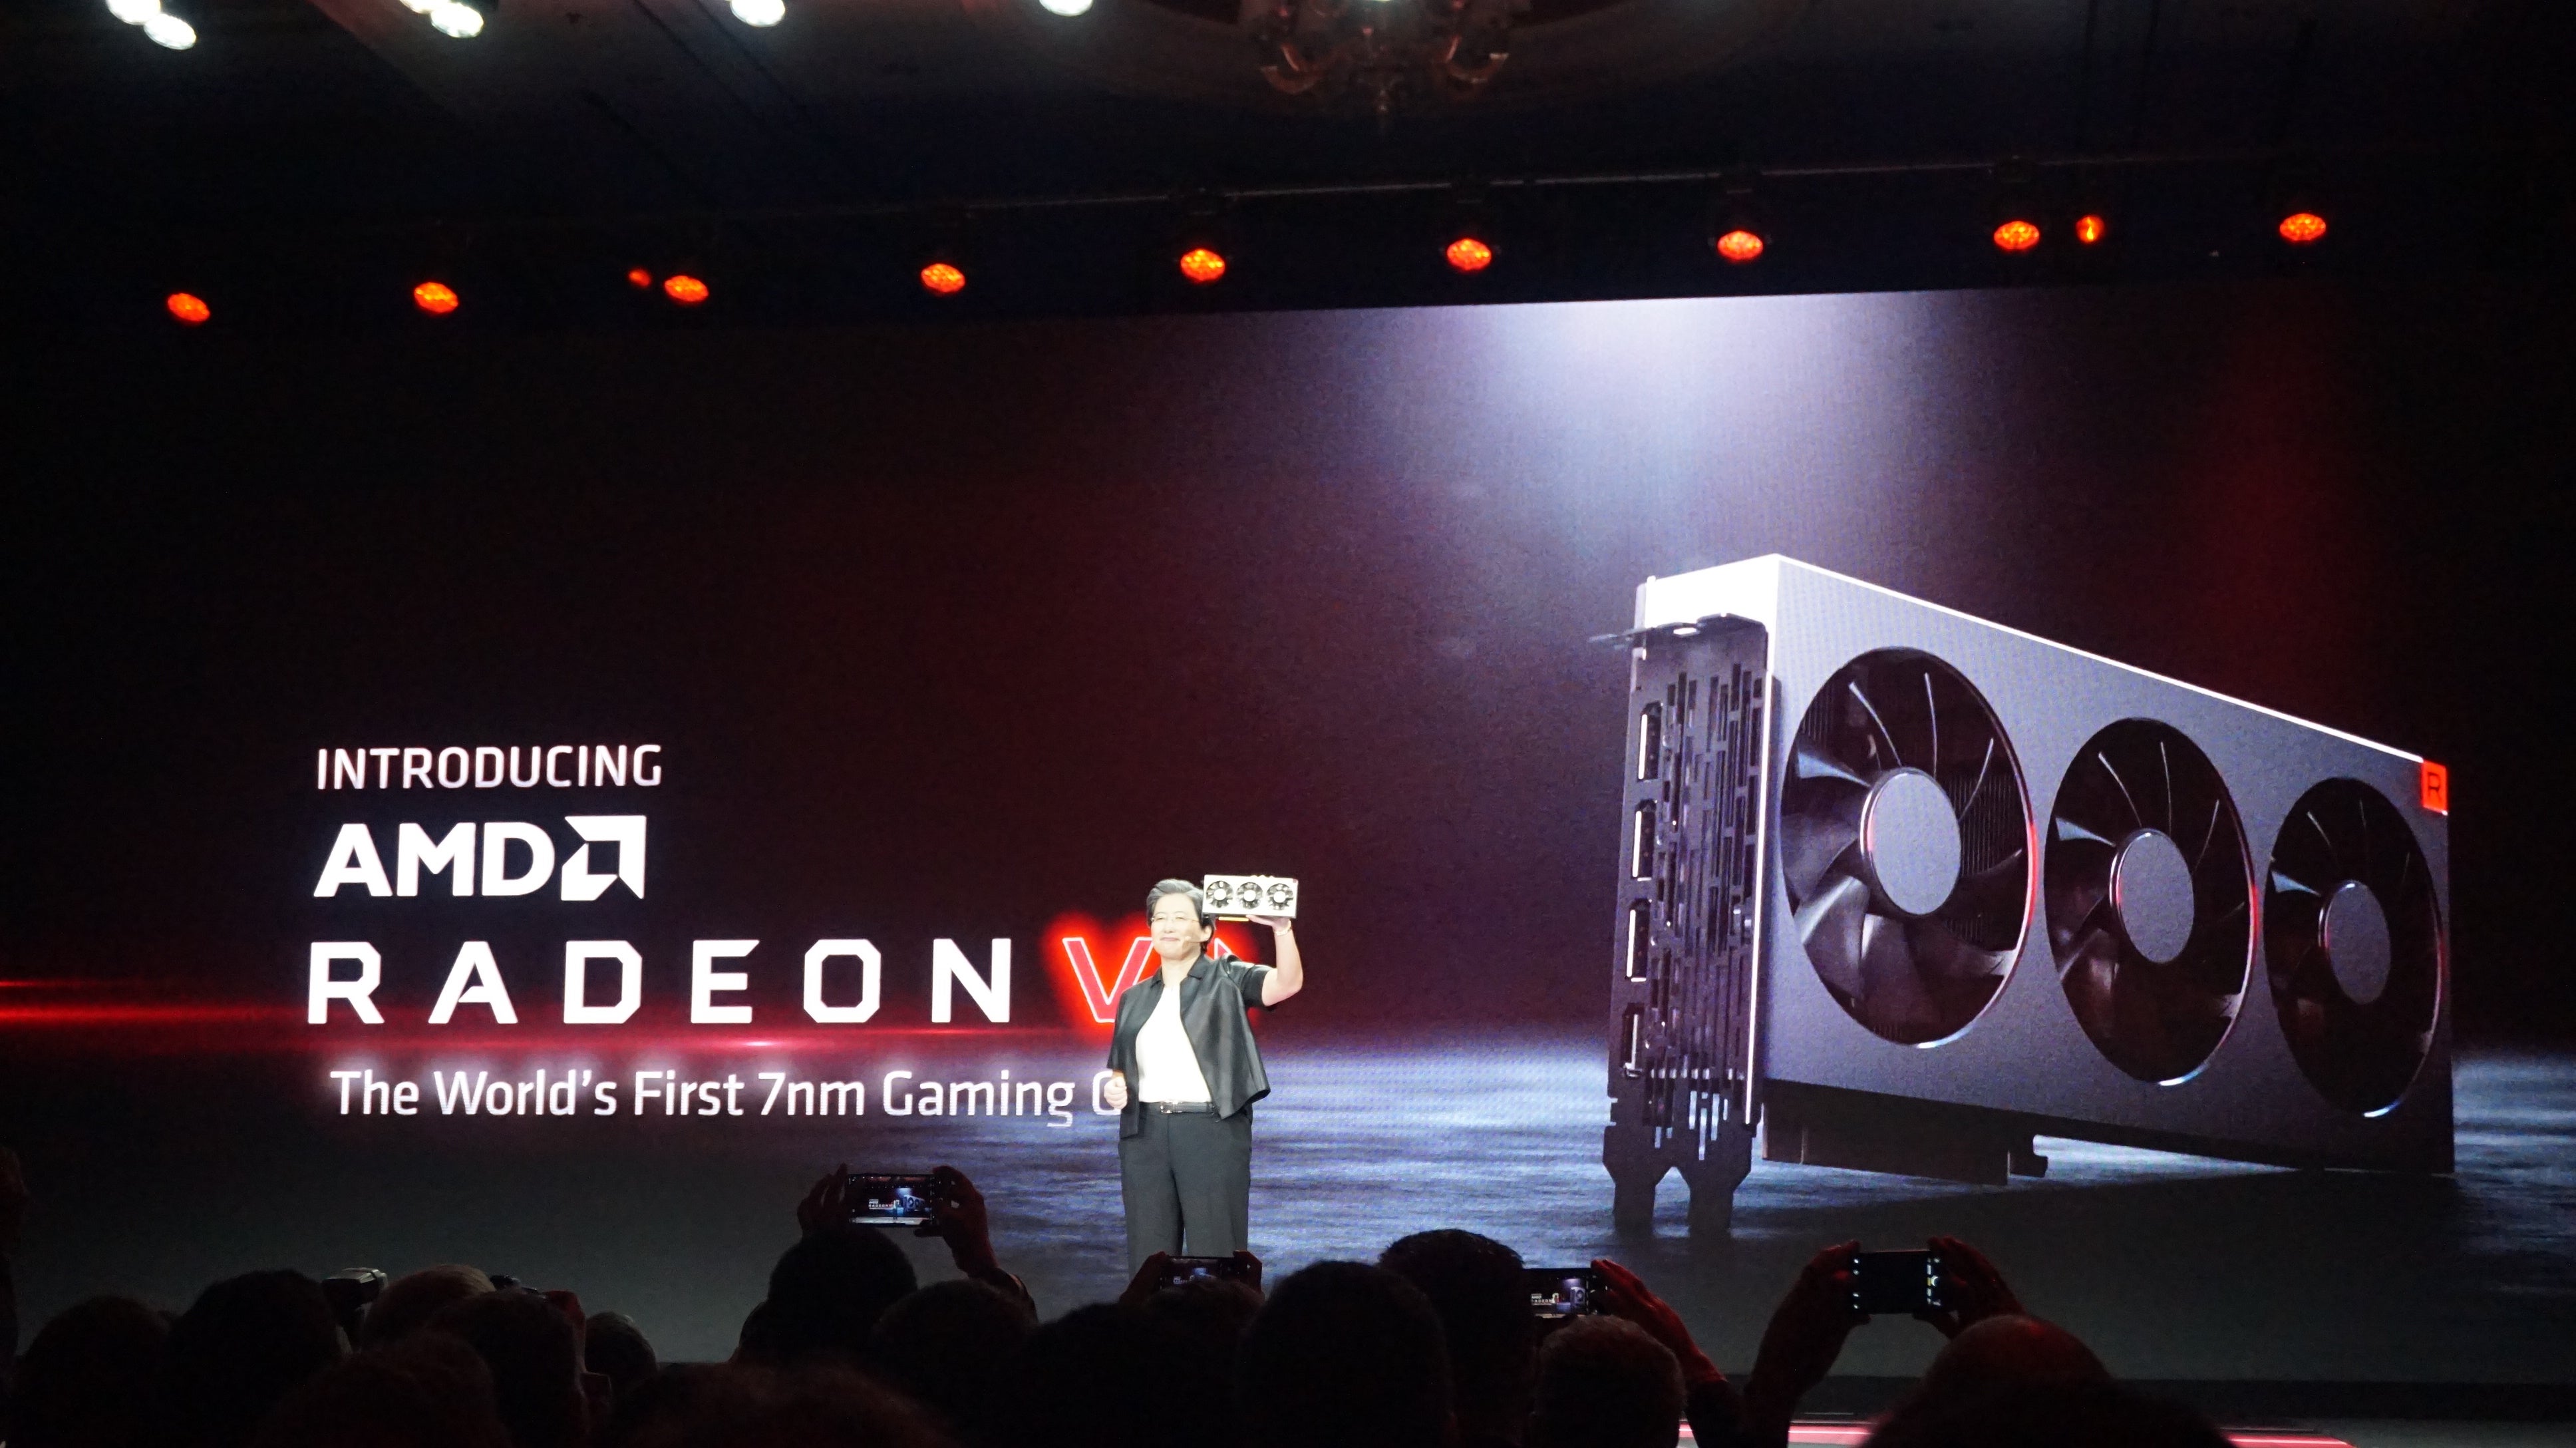 AMD Radeon 7: price, specs, release date and everything you need